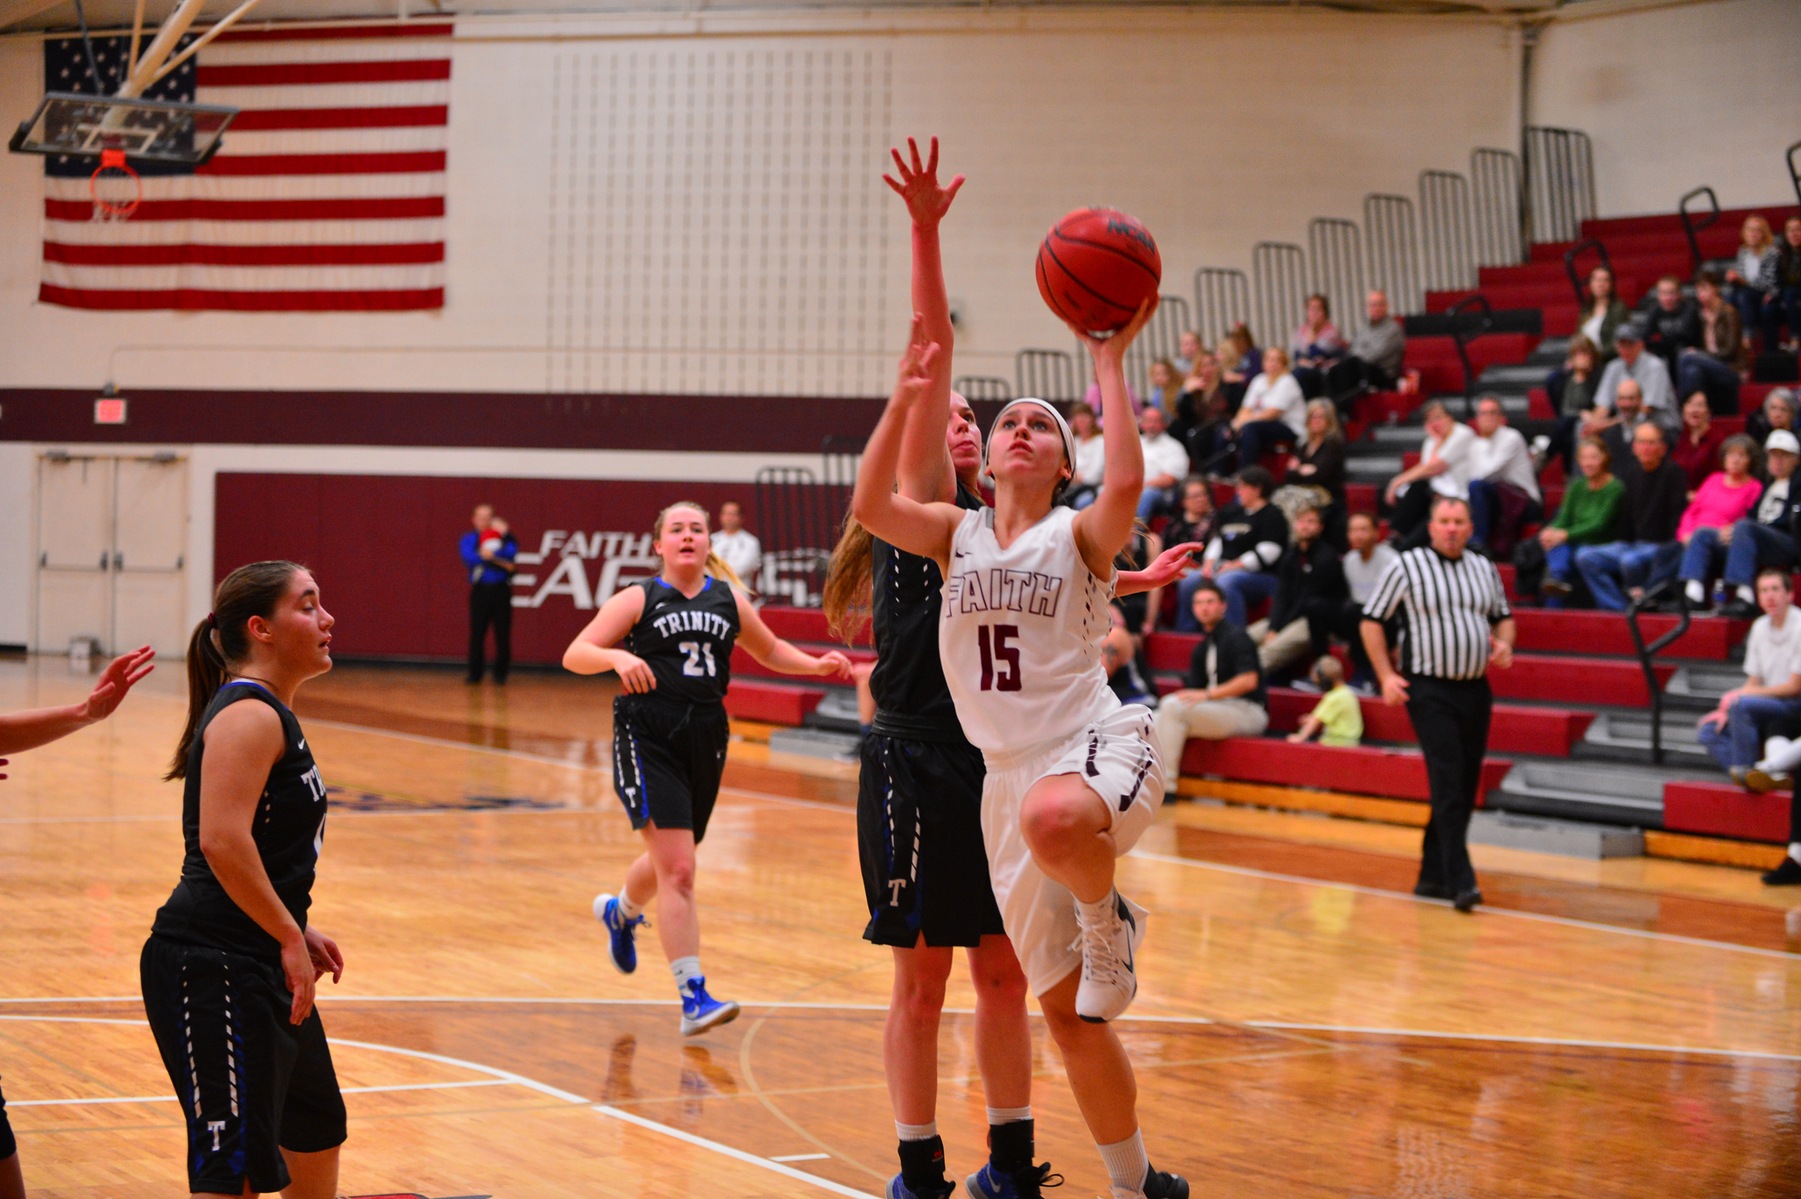 Lady Eagles Host Final Game of Semester